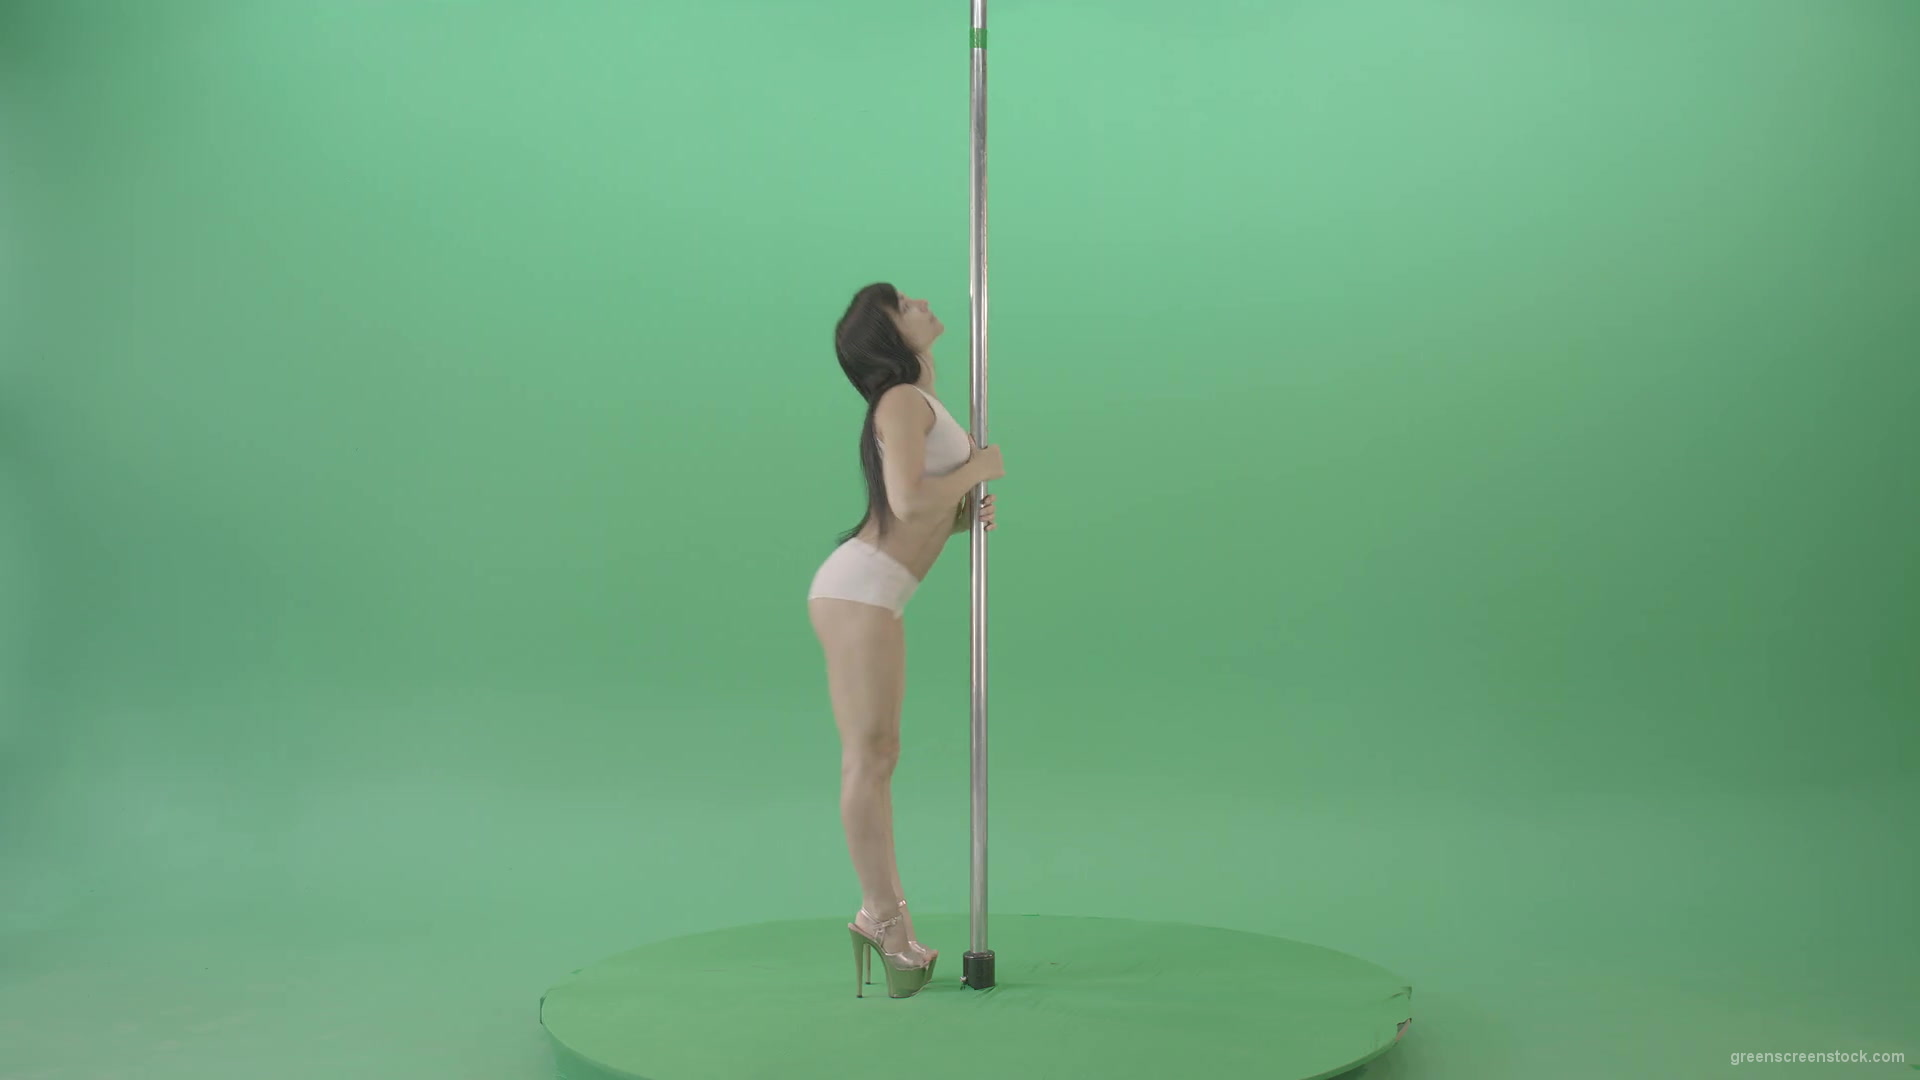 vj video background Pole-Dancing-Girl-waving-with-body-on-green-screen-4K-Video-Footage-1920_003